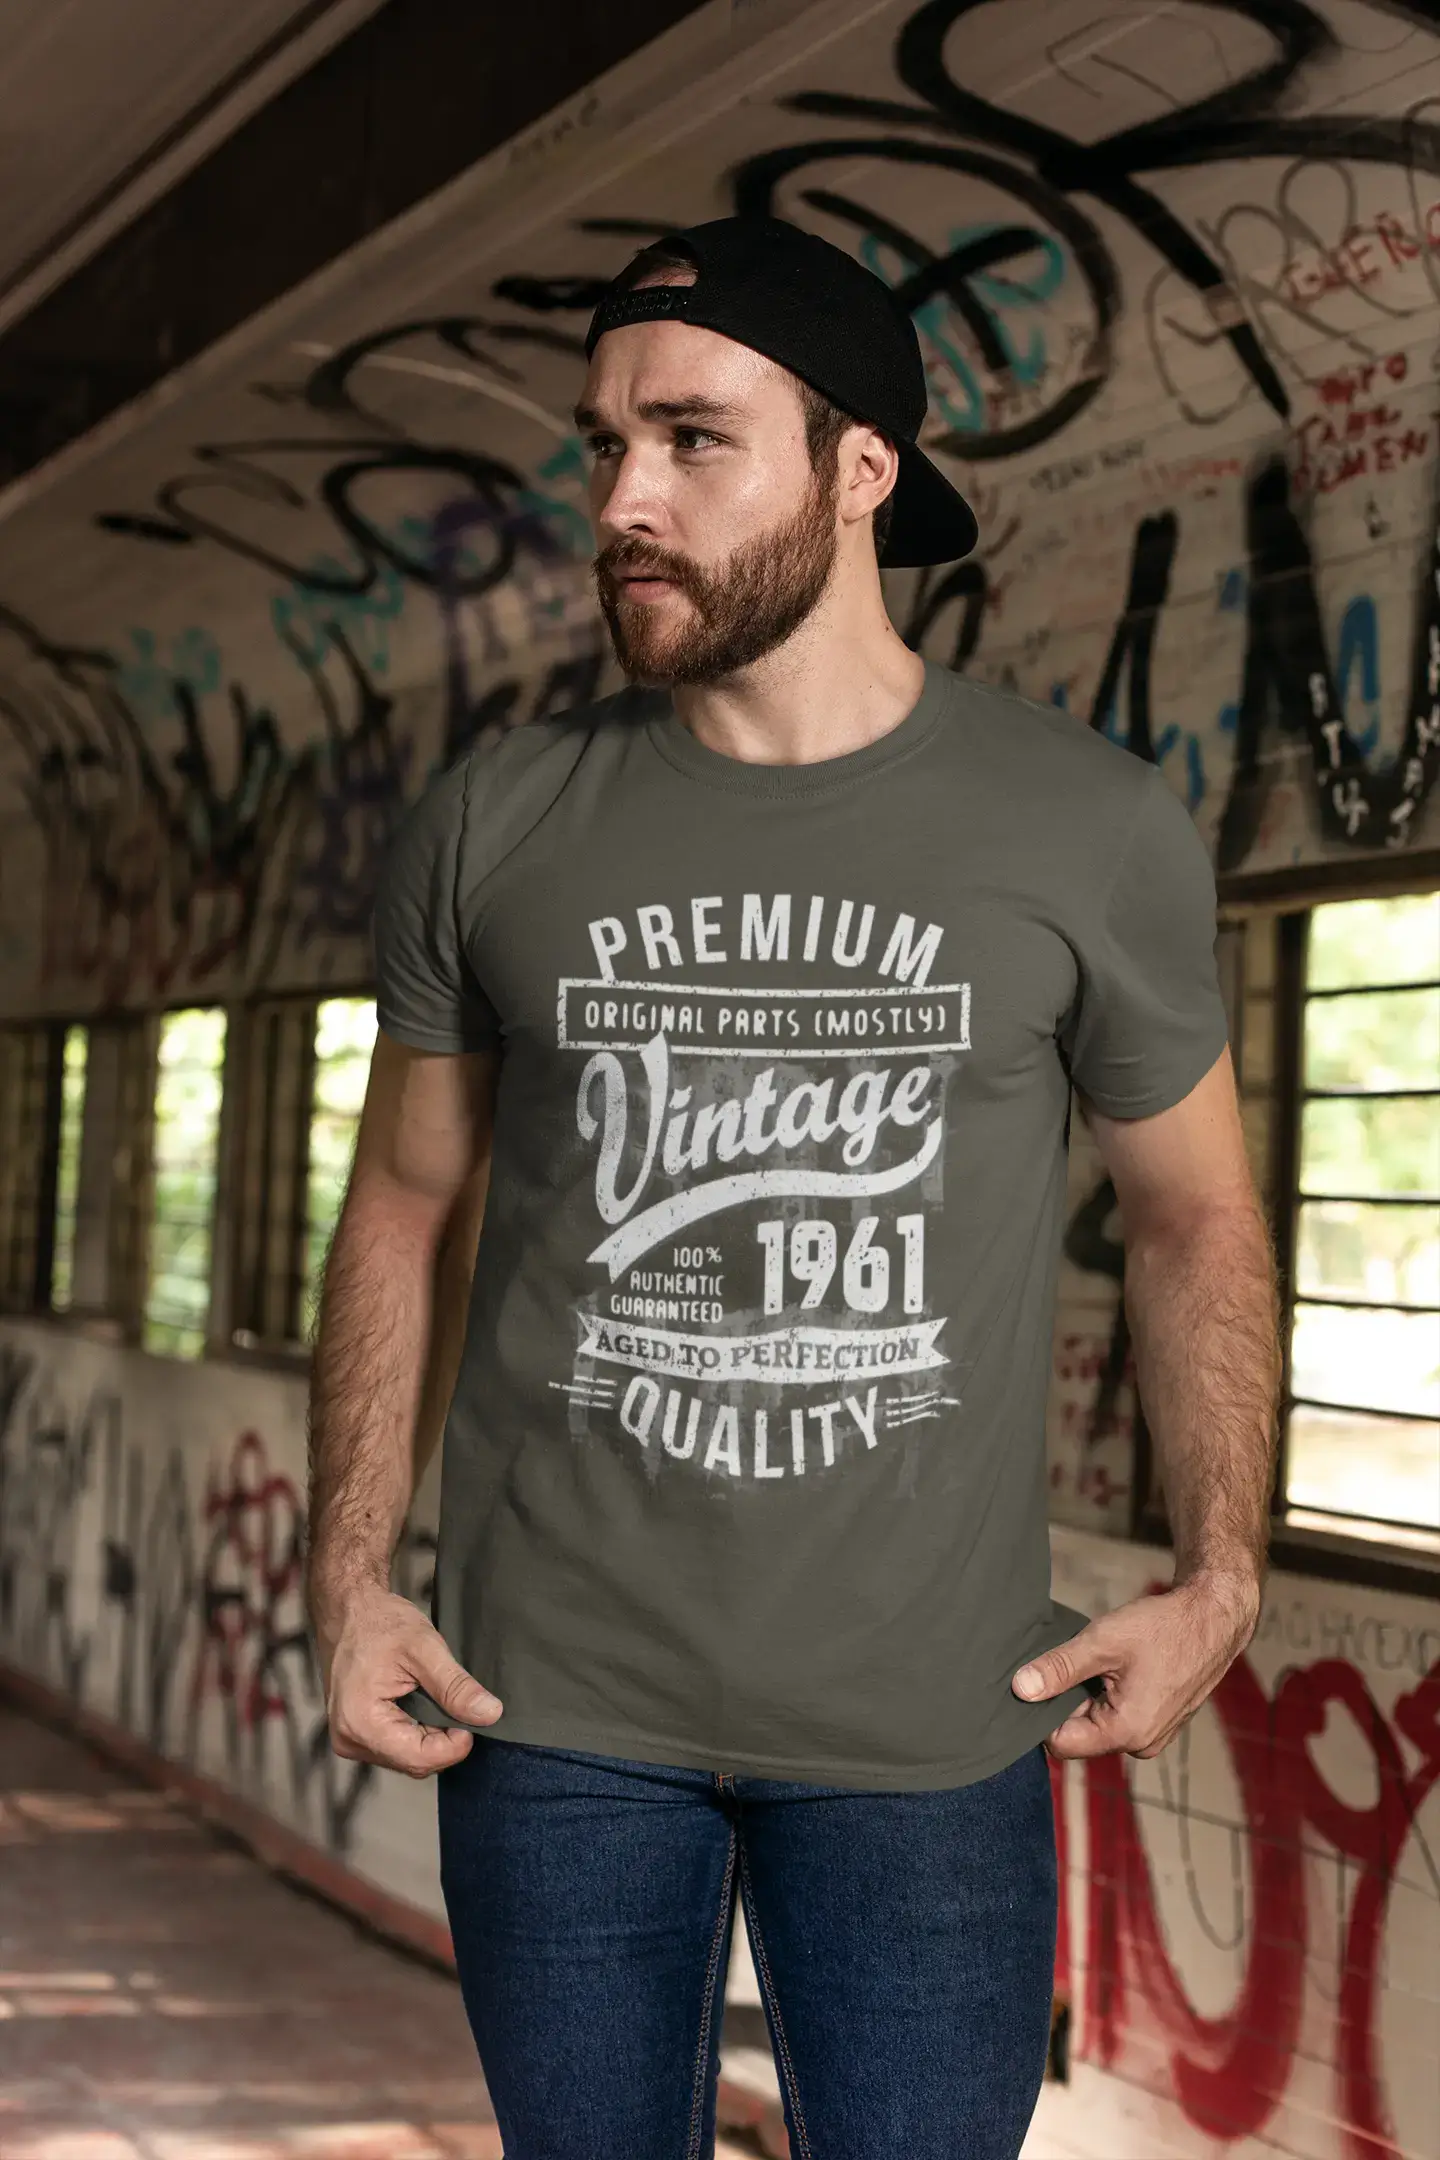 ULTRABASIC - Graphic Men's 1961 Aged to Perfection Birthday Gift T-Shirt